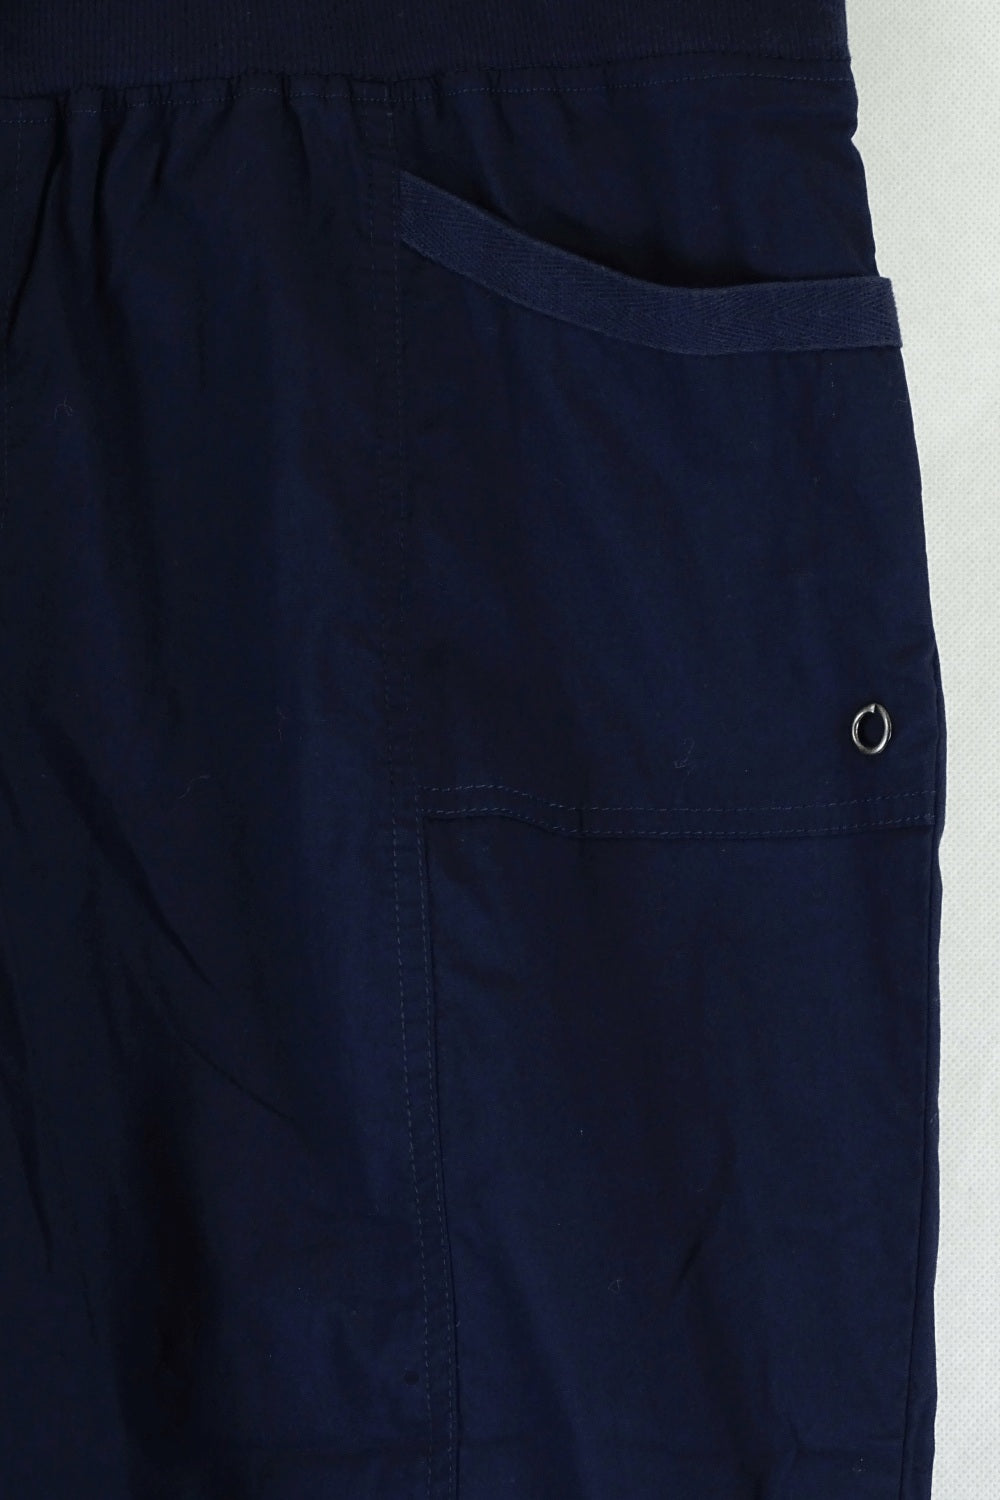 Autograph Navy Cropped Cargo Pants 18